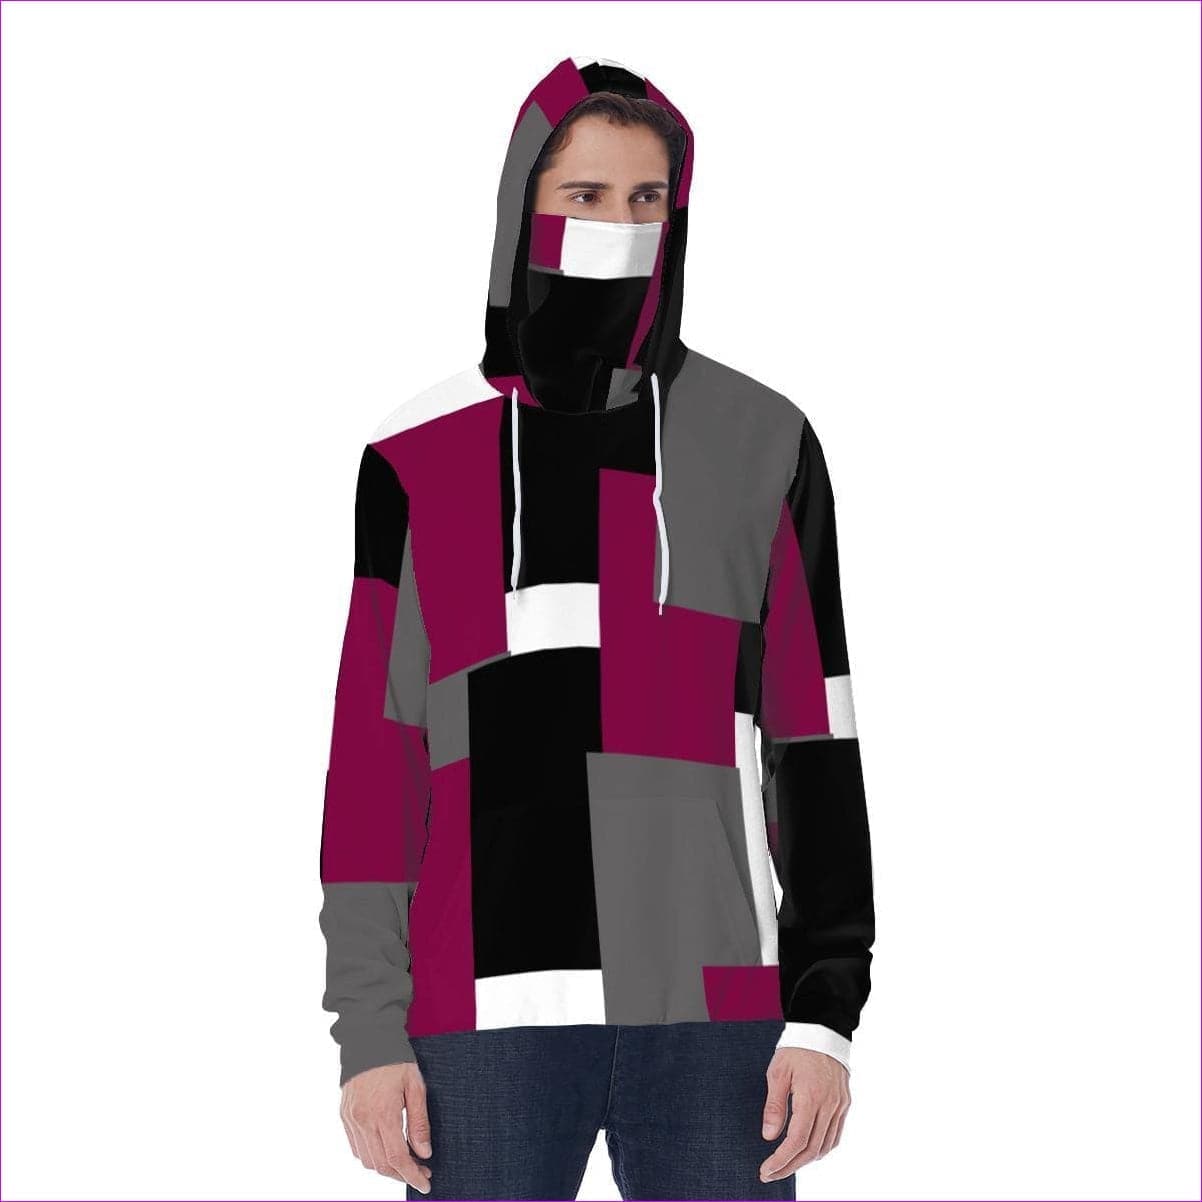 multi-colored Patchwork Unisex Pullover Hoodie w/ built in mask - Unisex Hoodie at TFC&H Co.